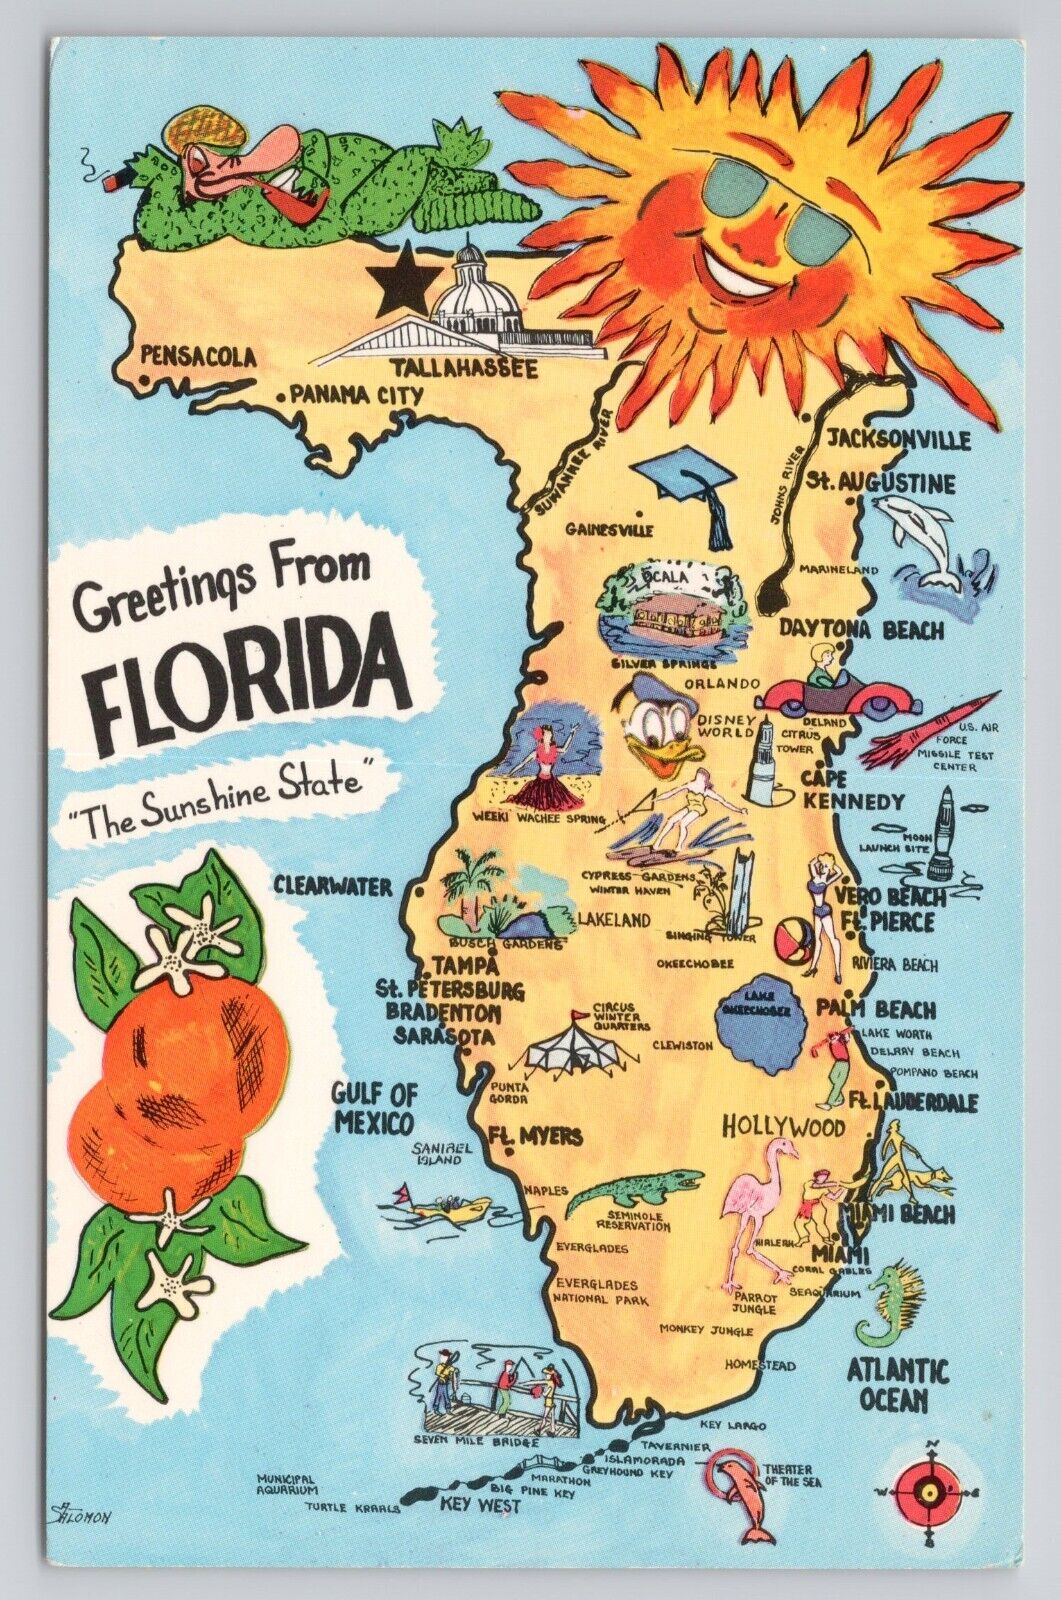 Postcard Greetings From Florida The Sunshine State